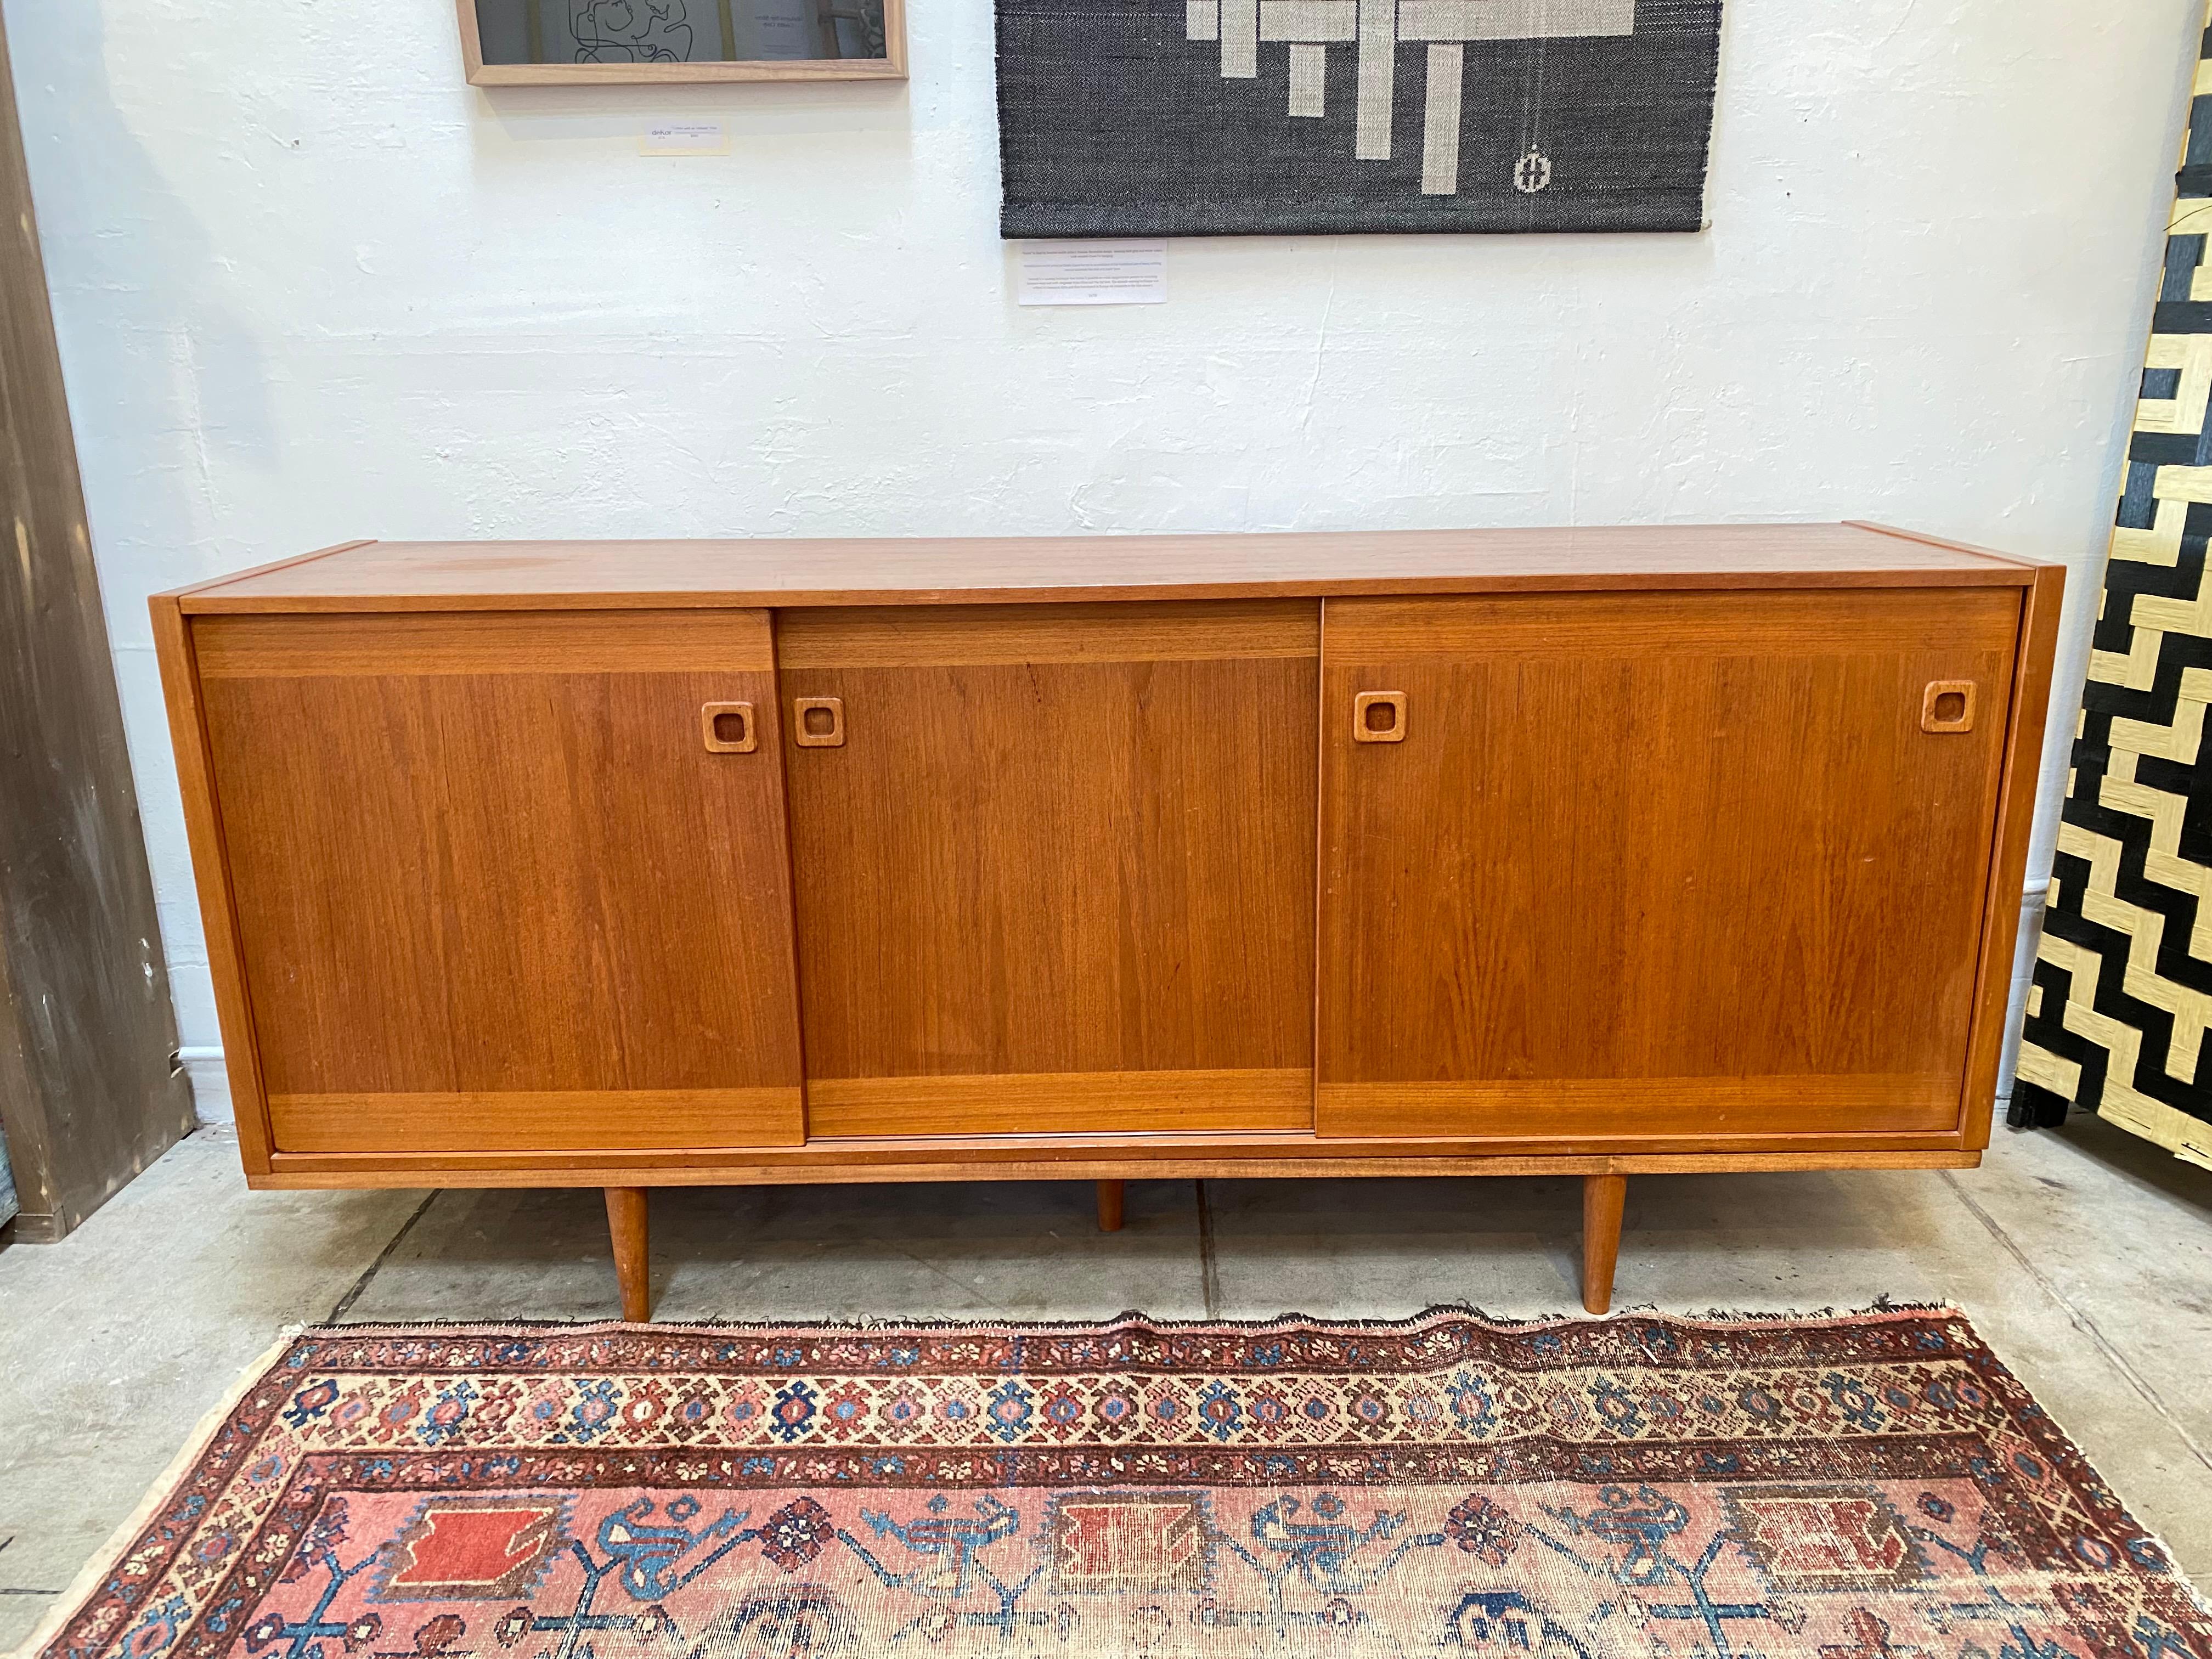 Mid-Century Modern Veneer credenza with 3 sliding doors that open to plenty of storage space. This credenza is in good vintage condition with normal wear consistent with age and use. 

Dimensions: 71